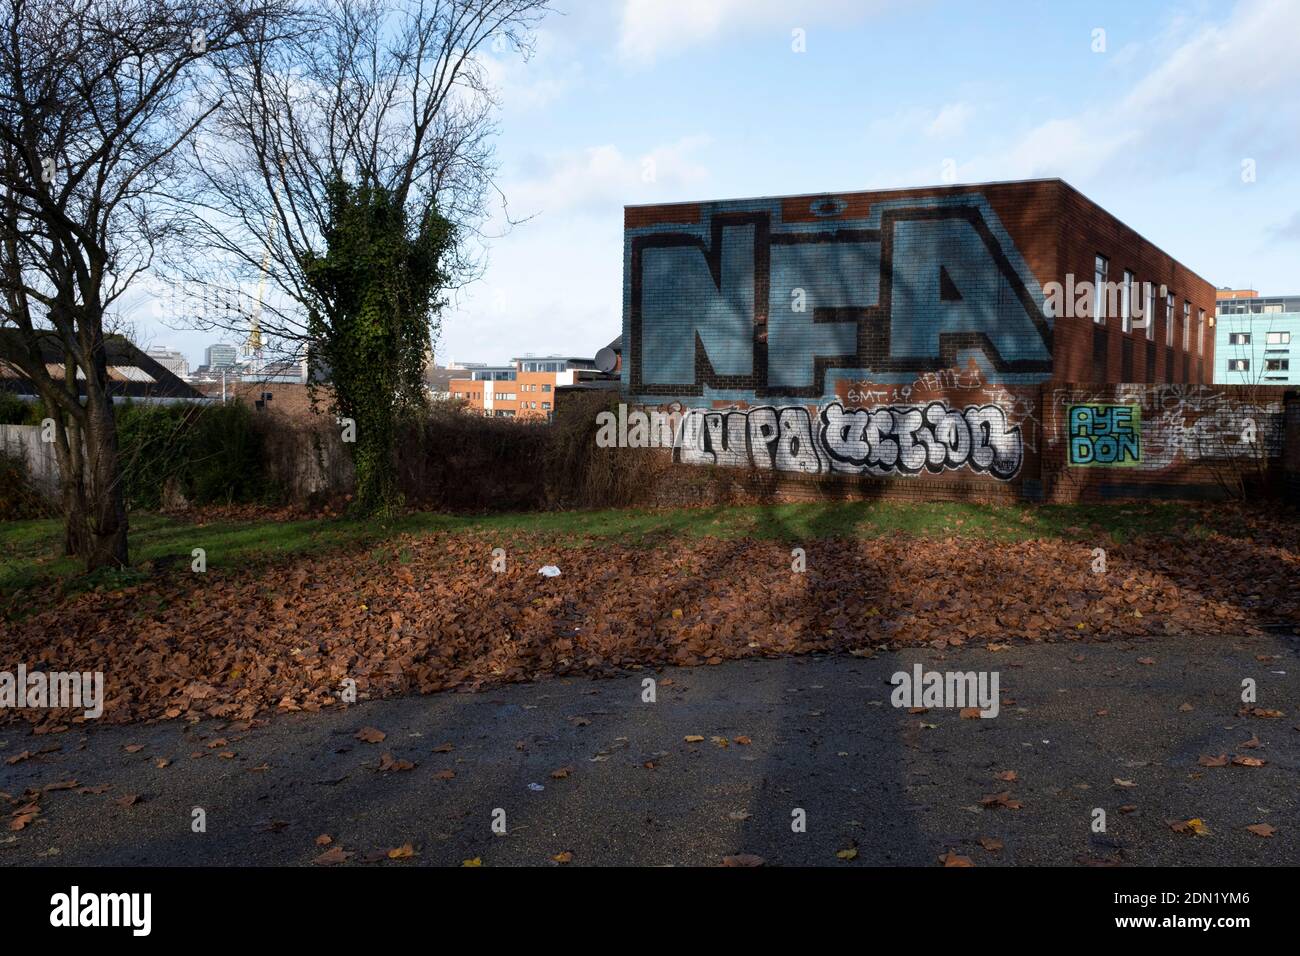 Large NFA graffiti crew letters sprayed on a wall in the inner city area of Highgate on 14th December 2020 in Birmingham, United Kingdom. This is a common signt in Birmingham, with the letters standing for expletive Not F-ing Around. Stock Photo